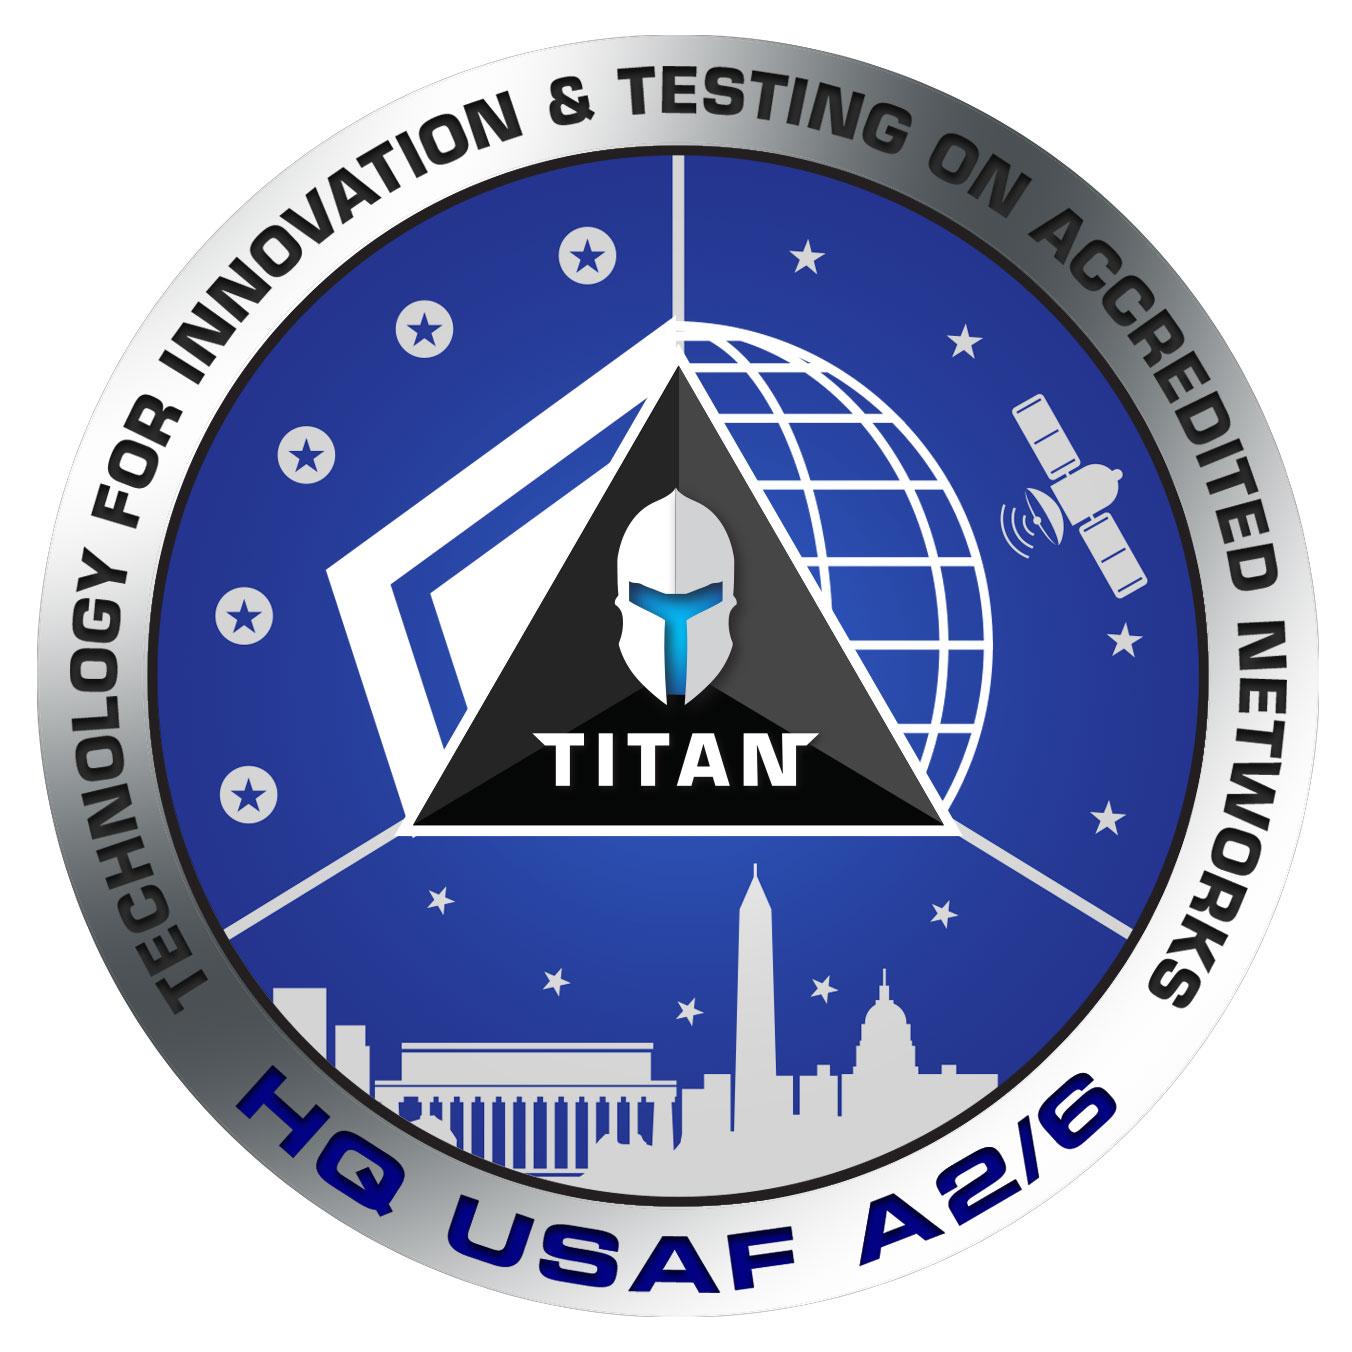 Technology for Innovation & Testing on Accredited Networks logo